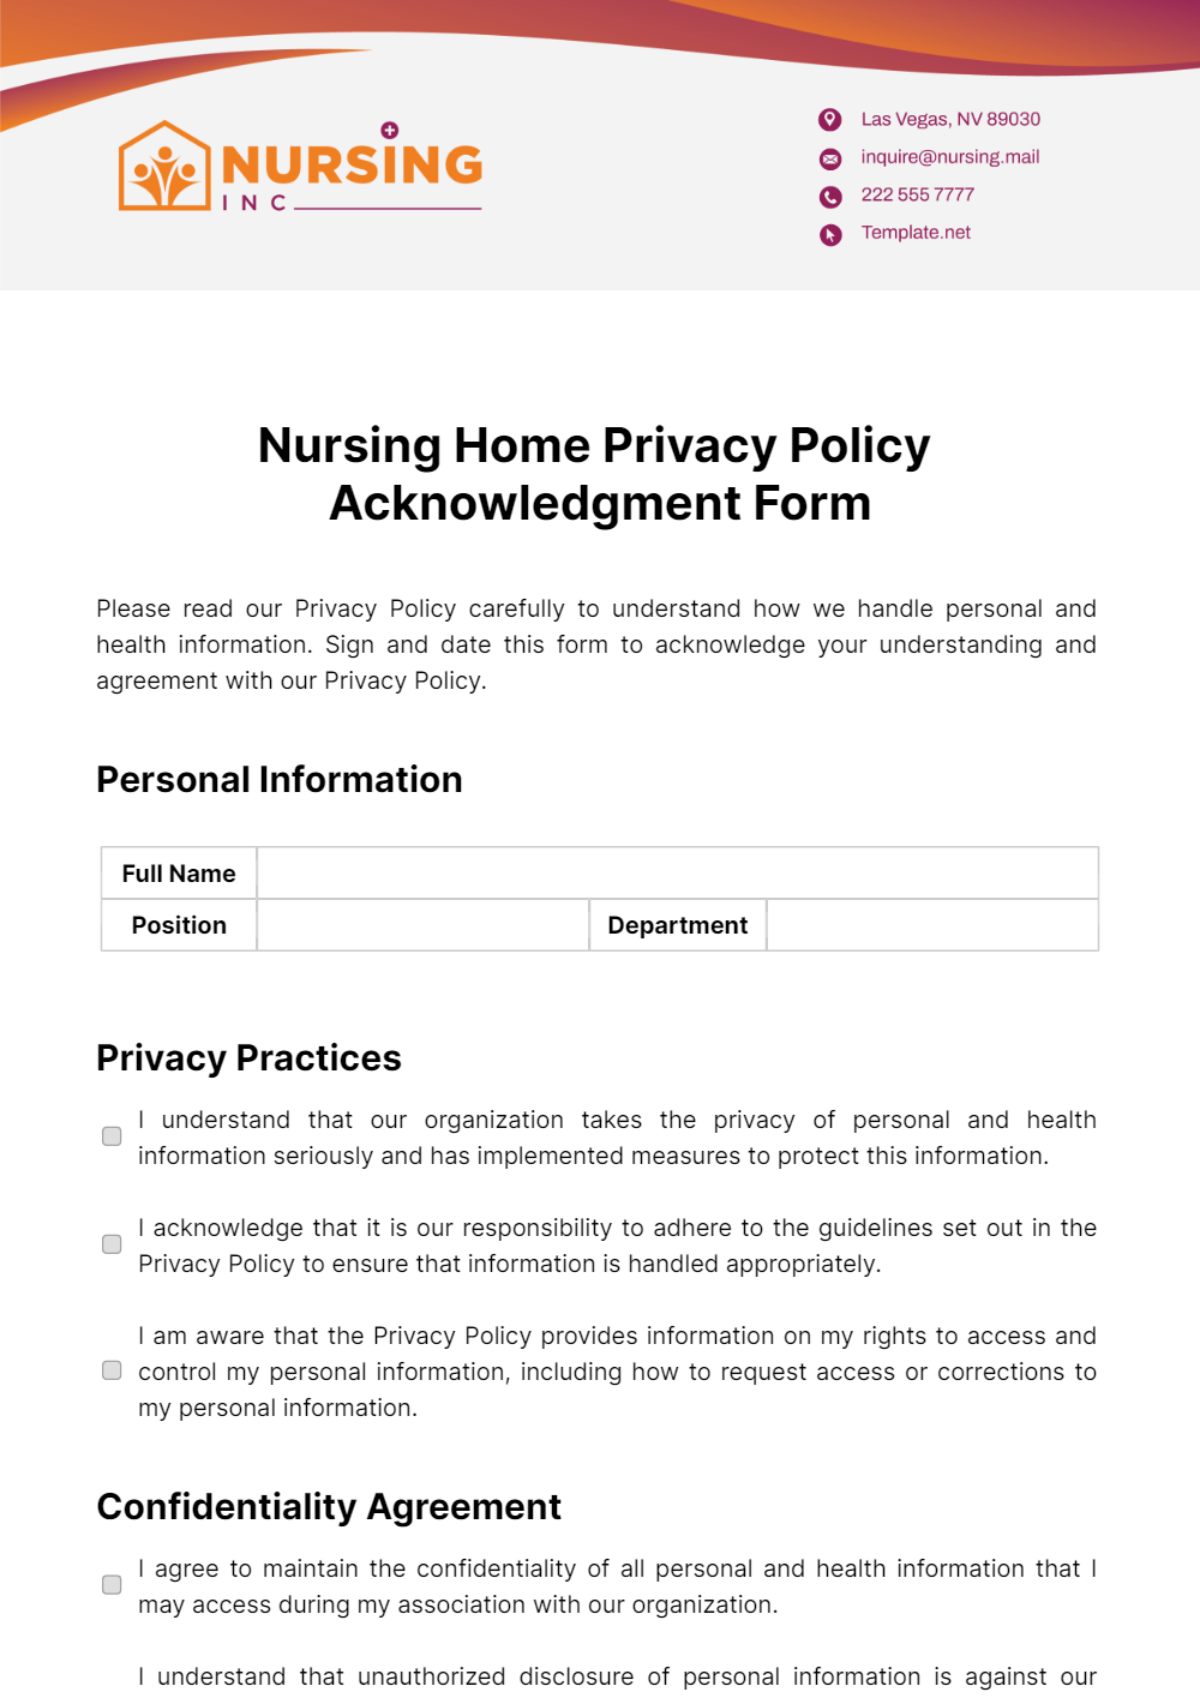 Nursing Home Privacy Policy Acknowledgment Form Template